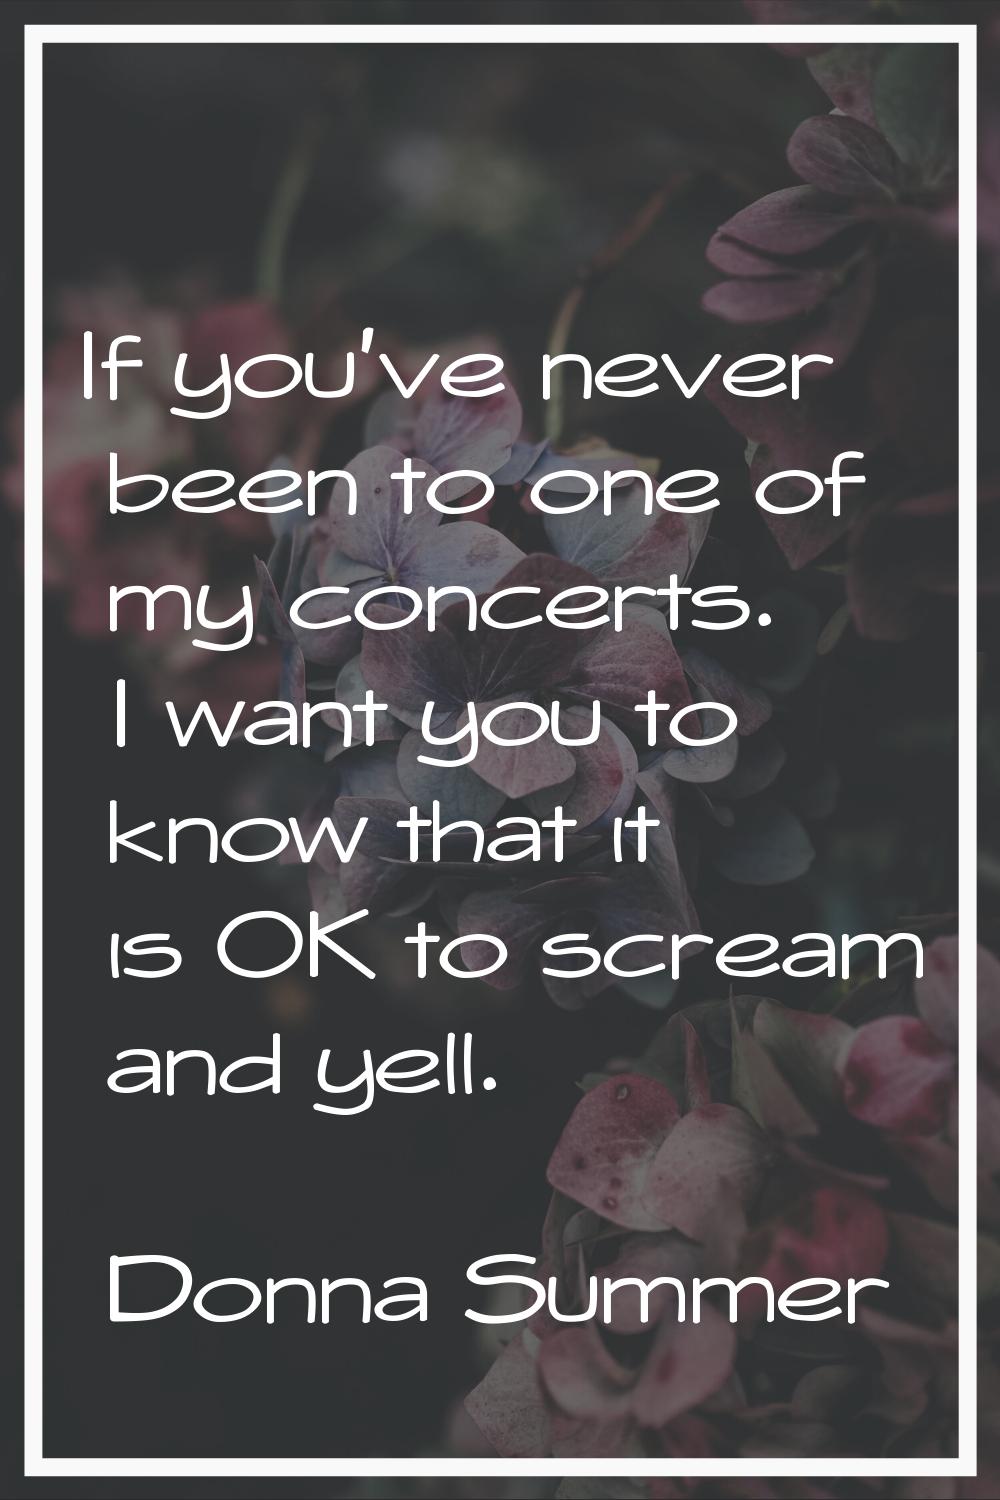 If you've never been to one of my concerts. I want you to know that it is OK to scream and yell.